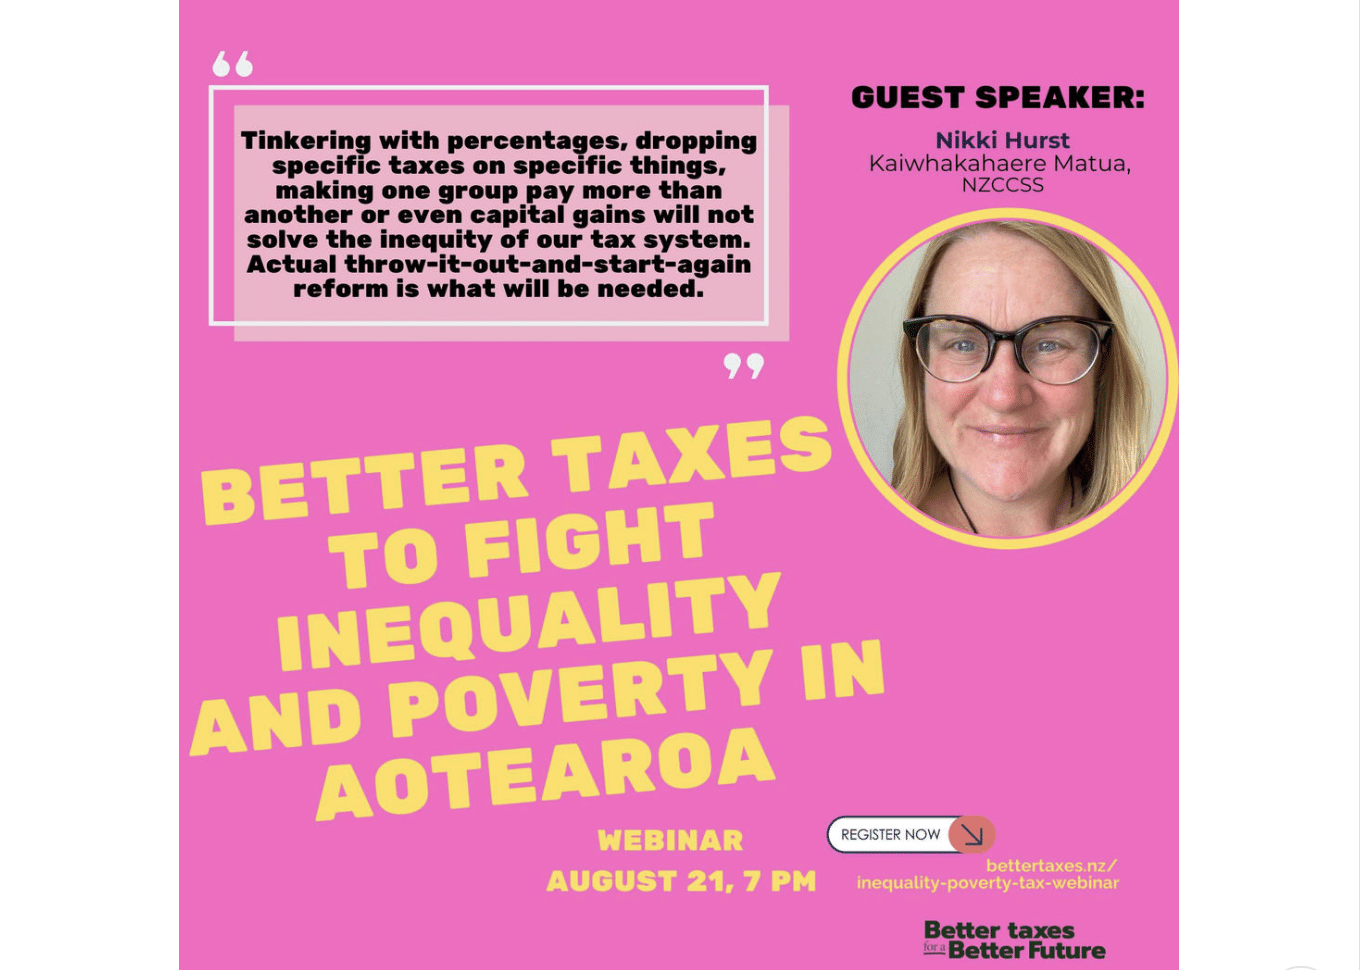 Pink Background square image advertising a webinar about 'Better Taxes to fight inequality and poverty in Aotearoa' and a quote from NZCCSS EO Nikki Hurst accompanied by a circular thumbnail image